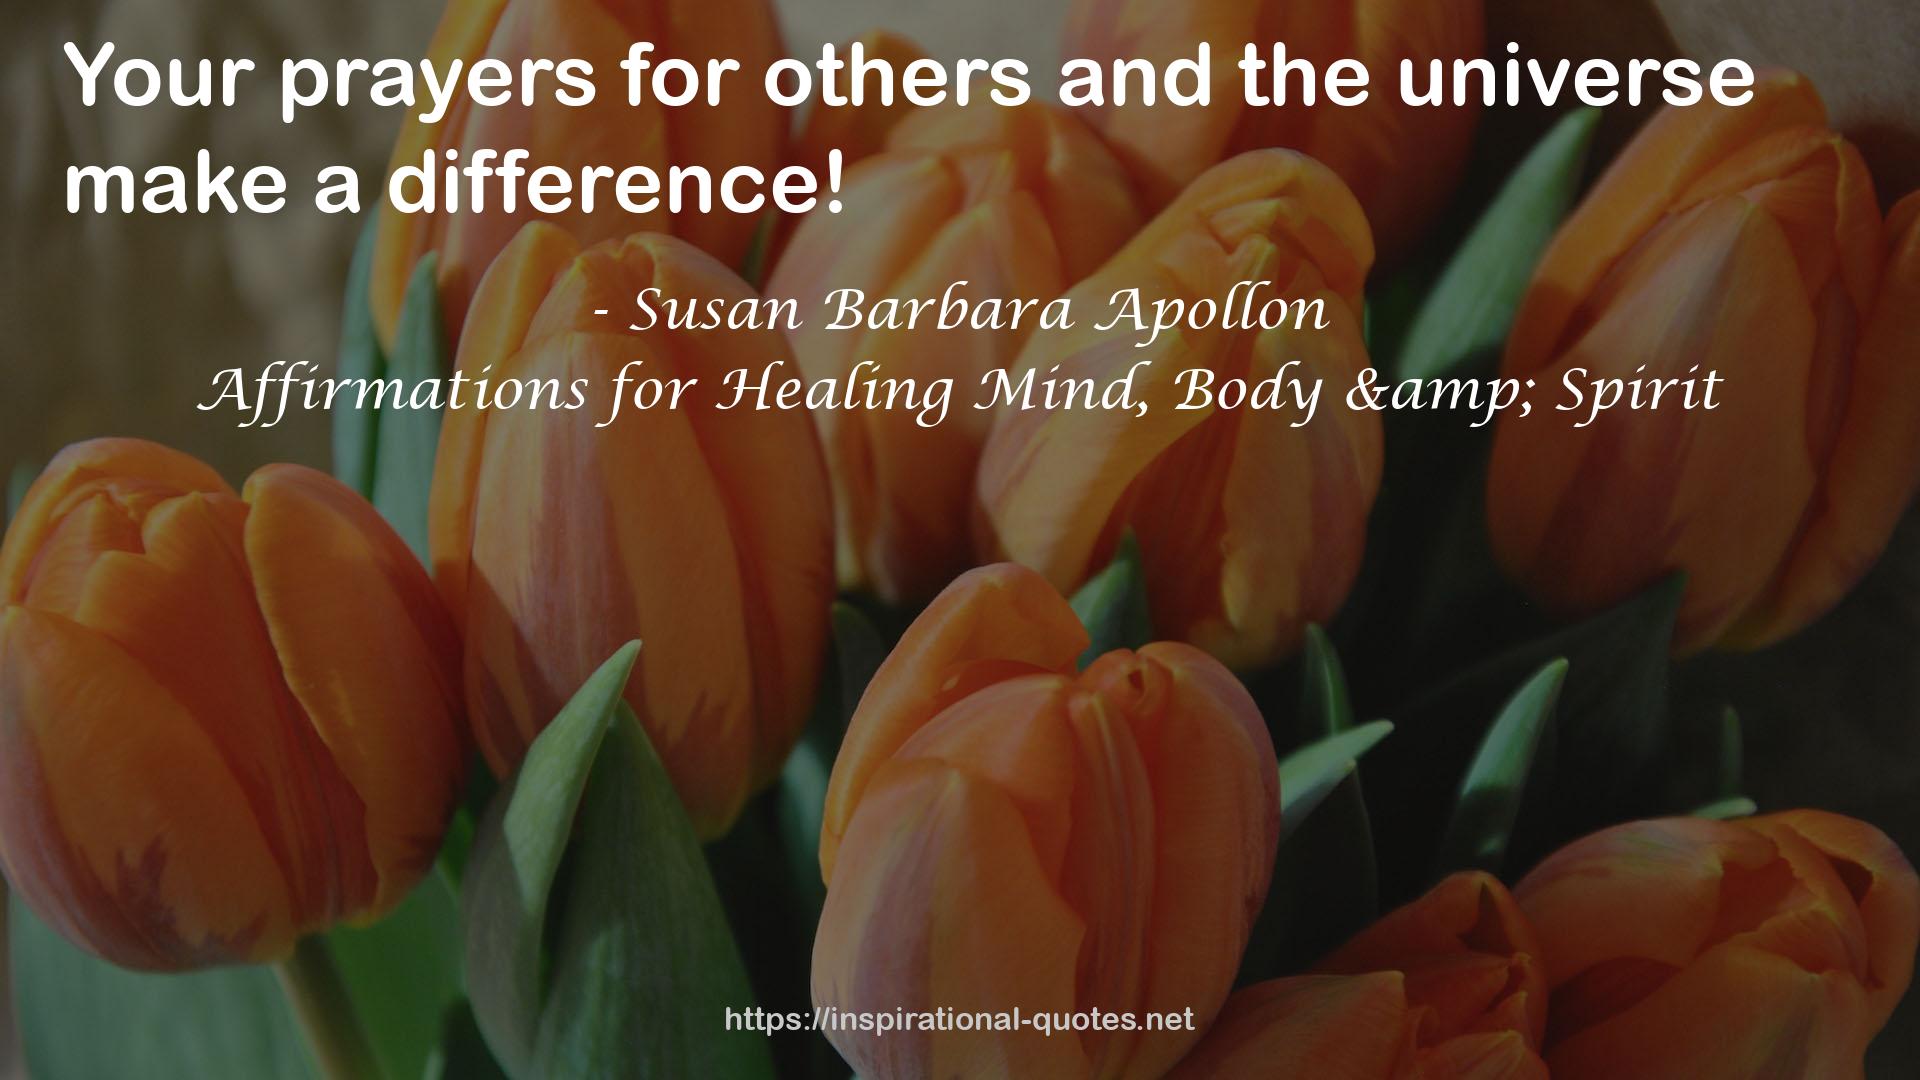 Affirmations for Healing Mind, Body & Spirit QUOTES